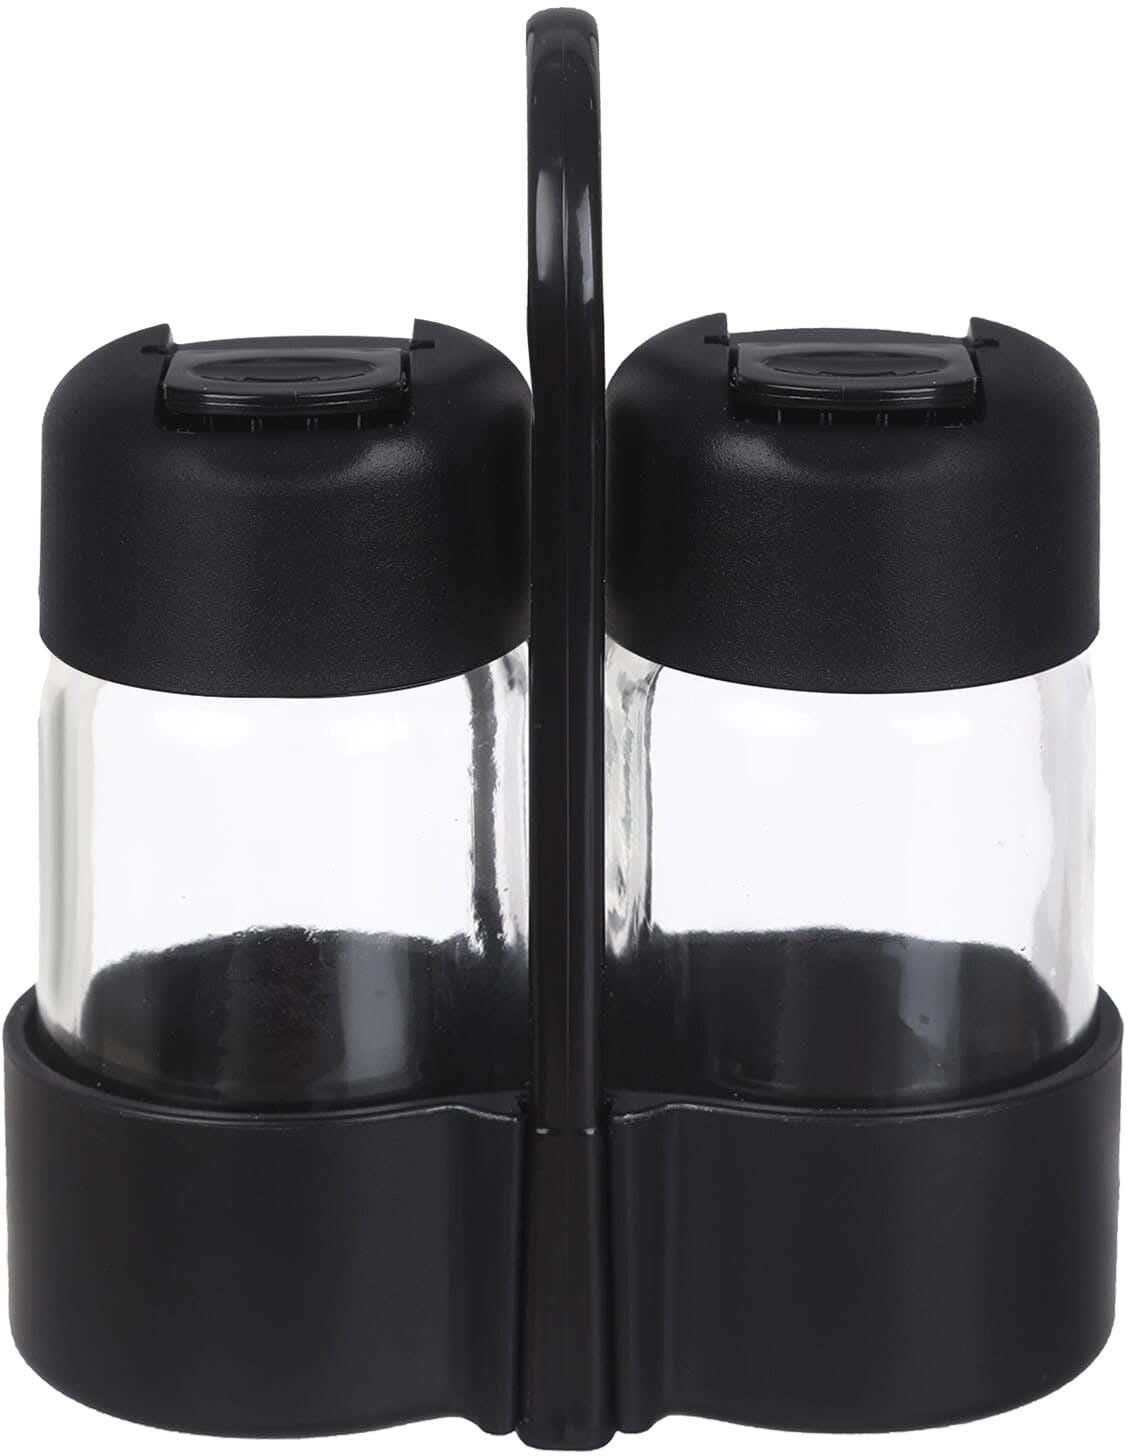 Get Ringa Glass Salt and Pepper Set with Holder, 67 ml - Clear Black with best offers | Raneen.com